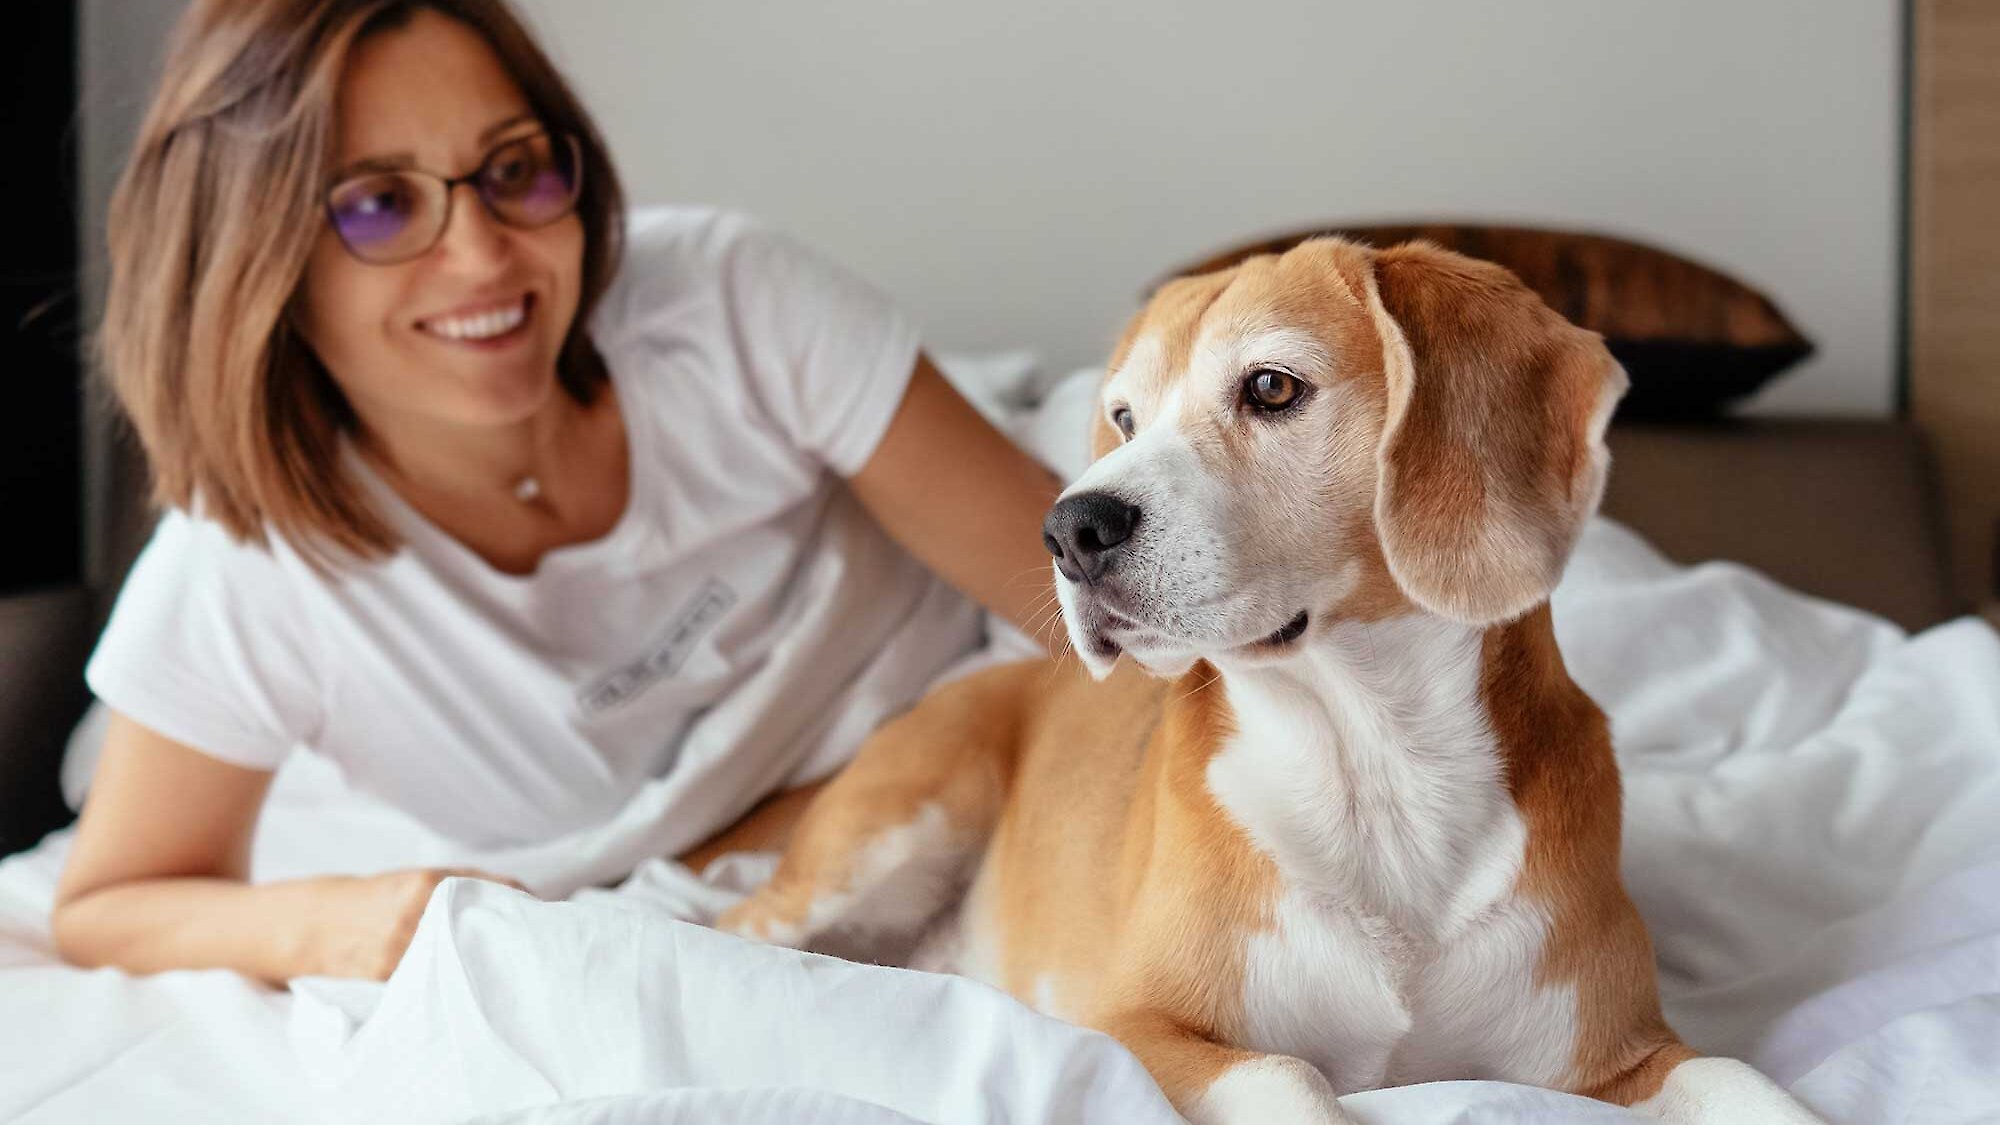 A woman lies on a hotel bed smiling at her orange and white dog